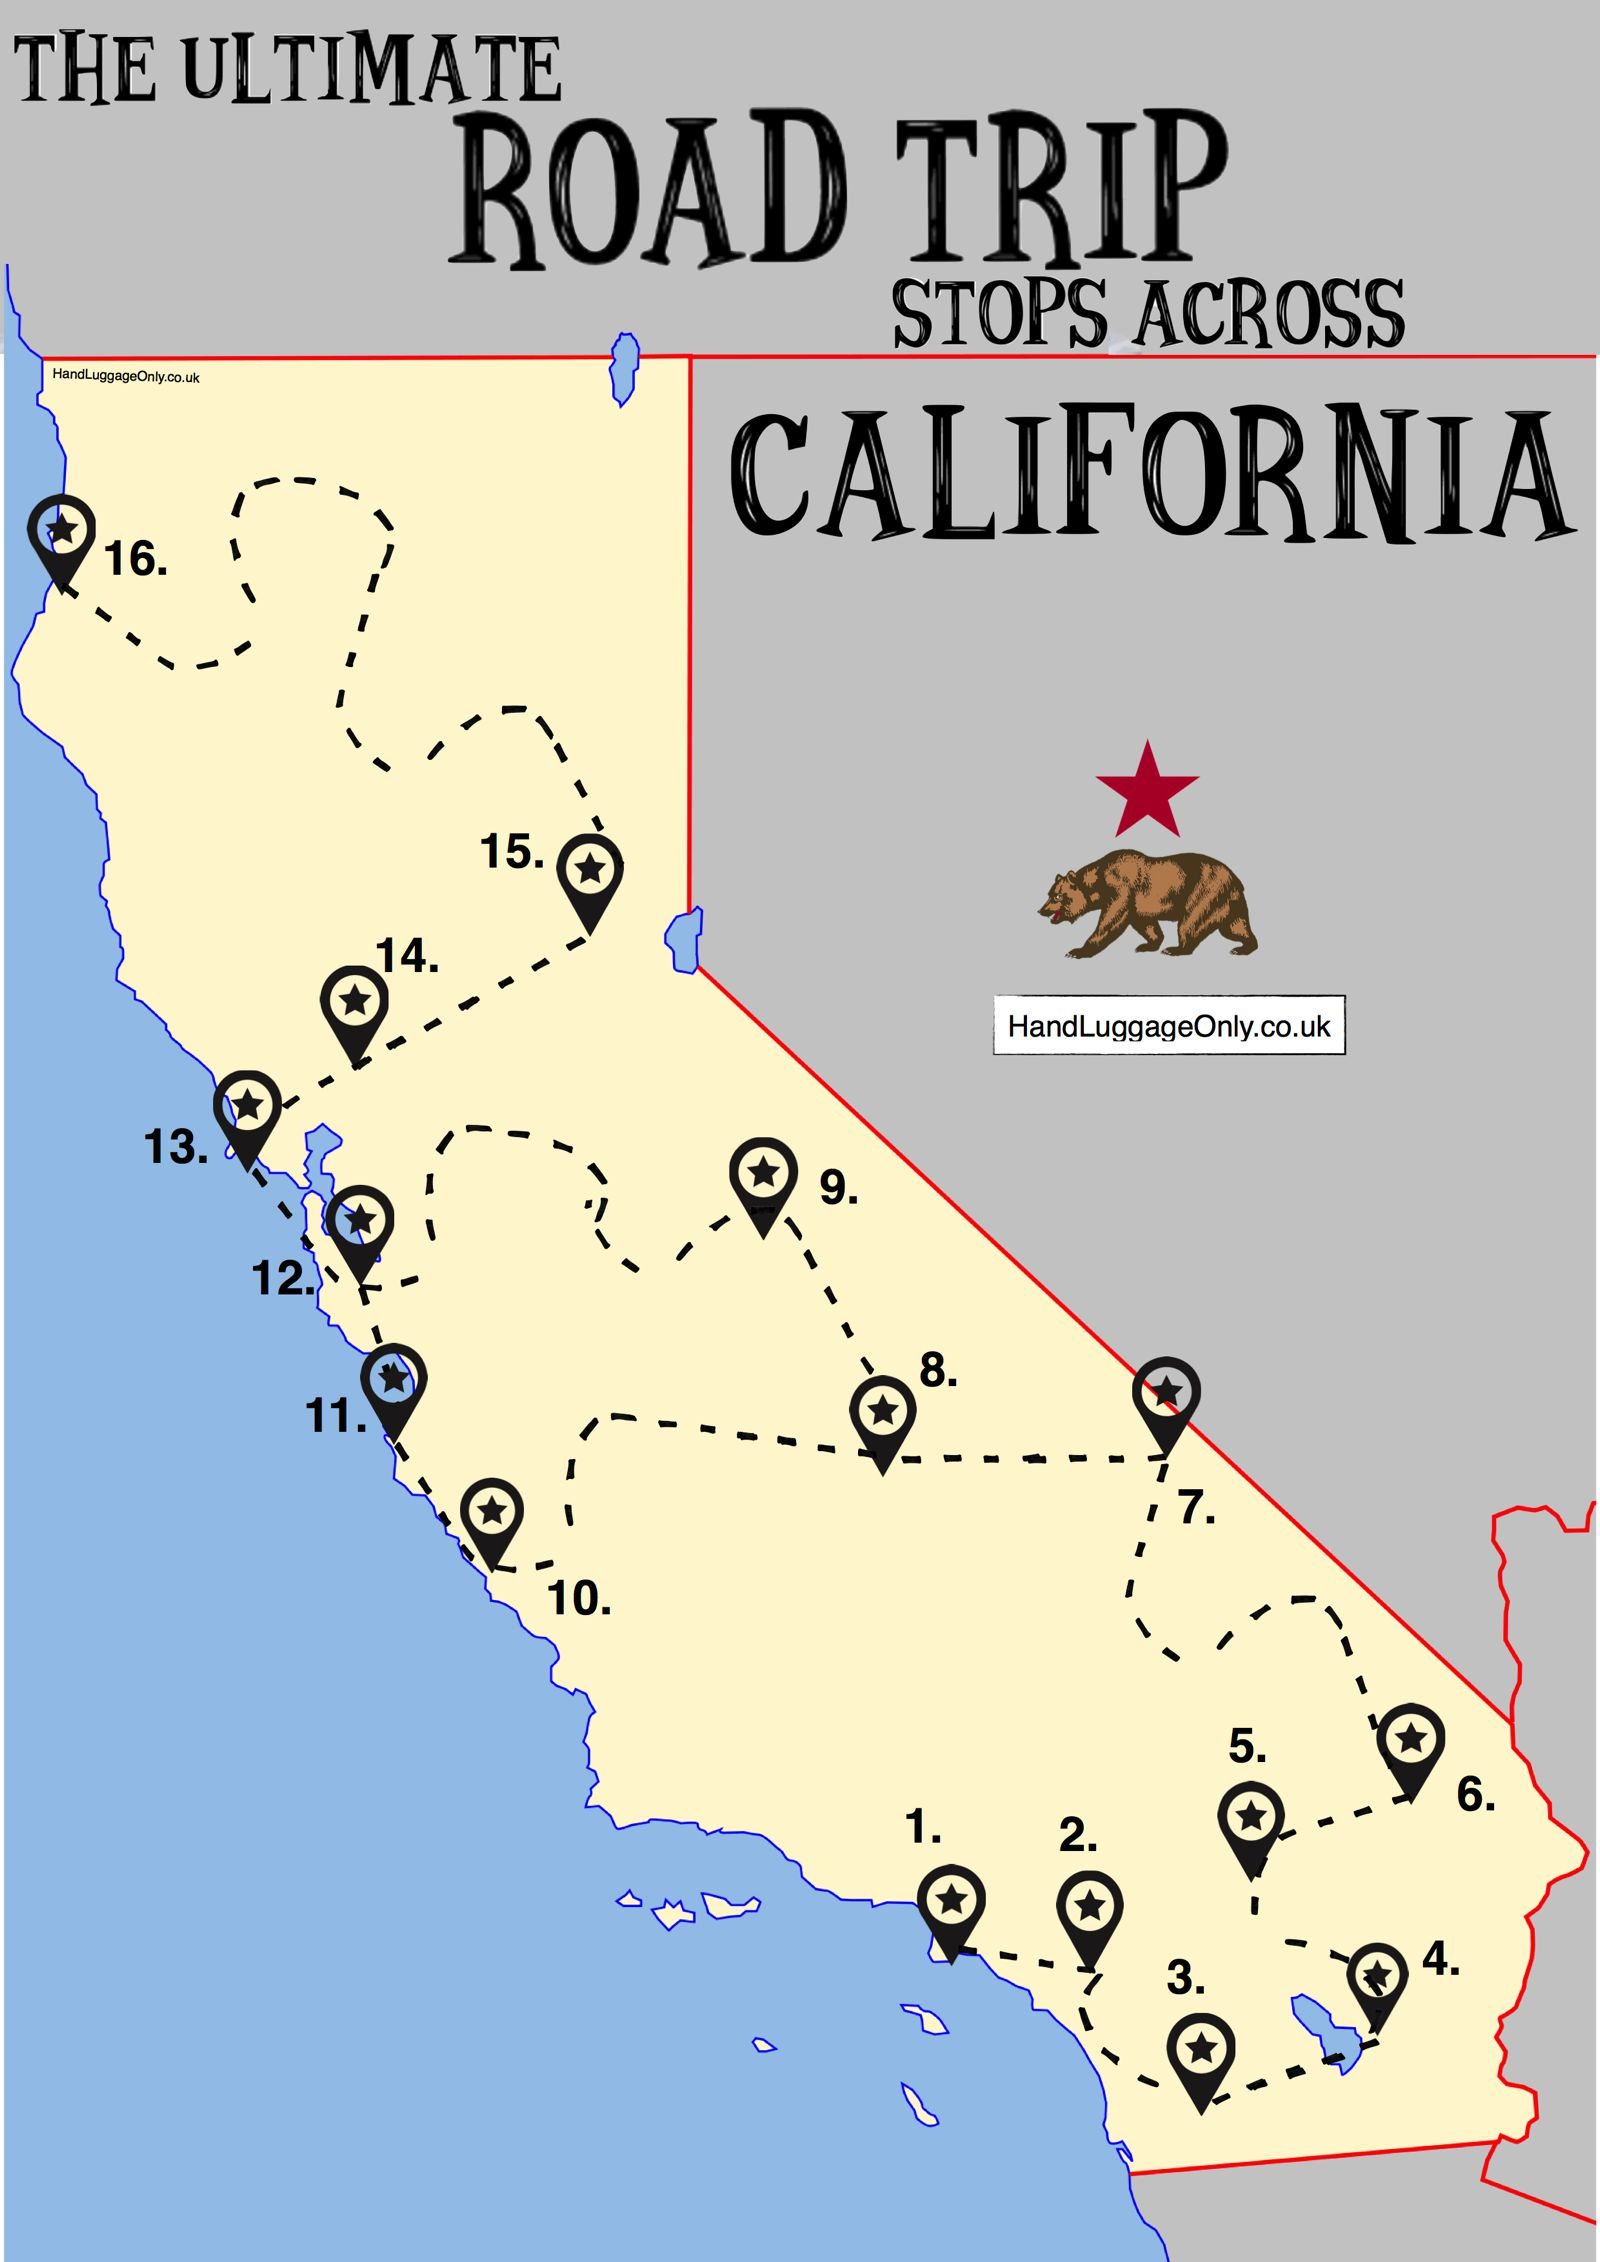 The Ultimate Road Trip Map Of Places To Visit In California - Hand - California Coast Map Road Trip